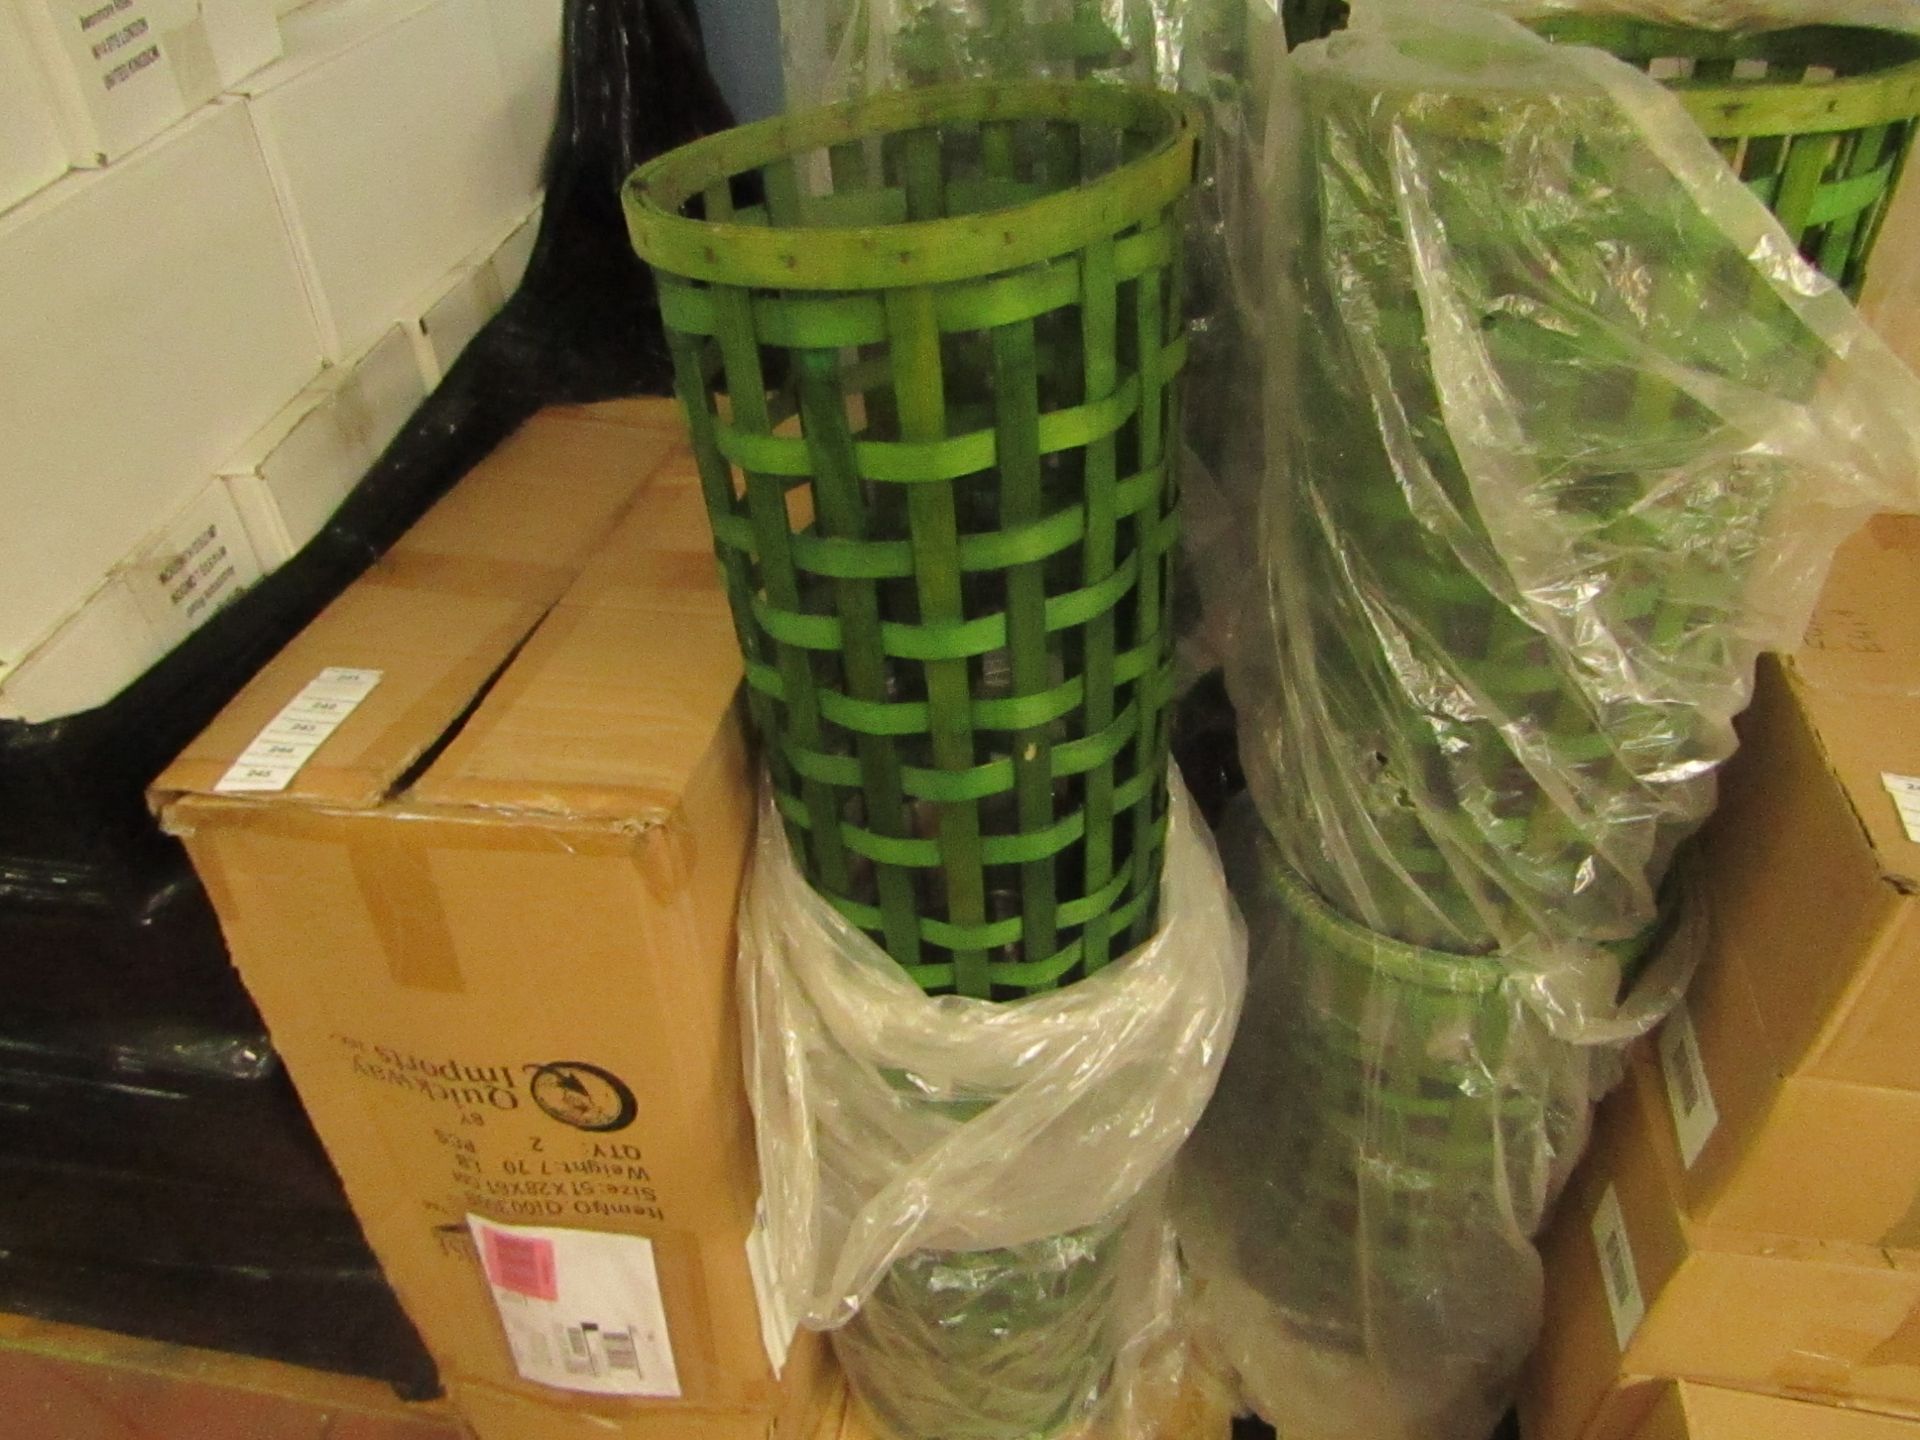 2x Green Wooden Mesh Umbrella Stands - Unused & Packaged.